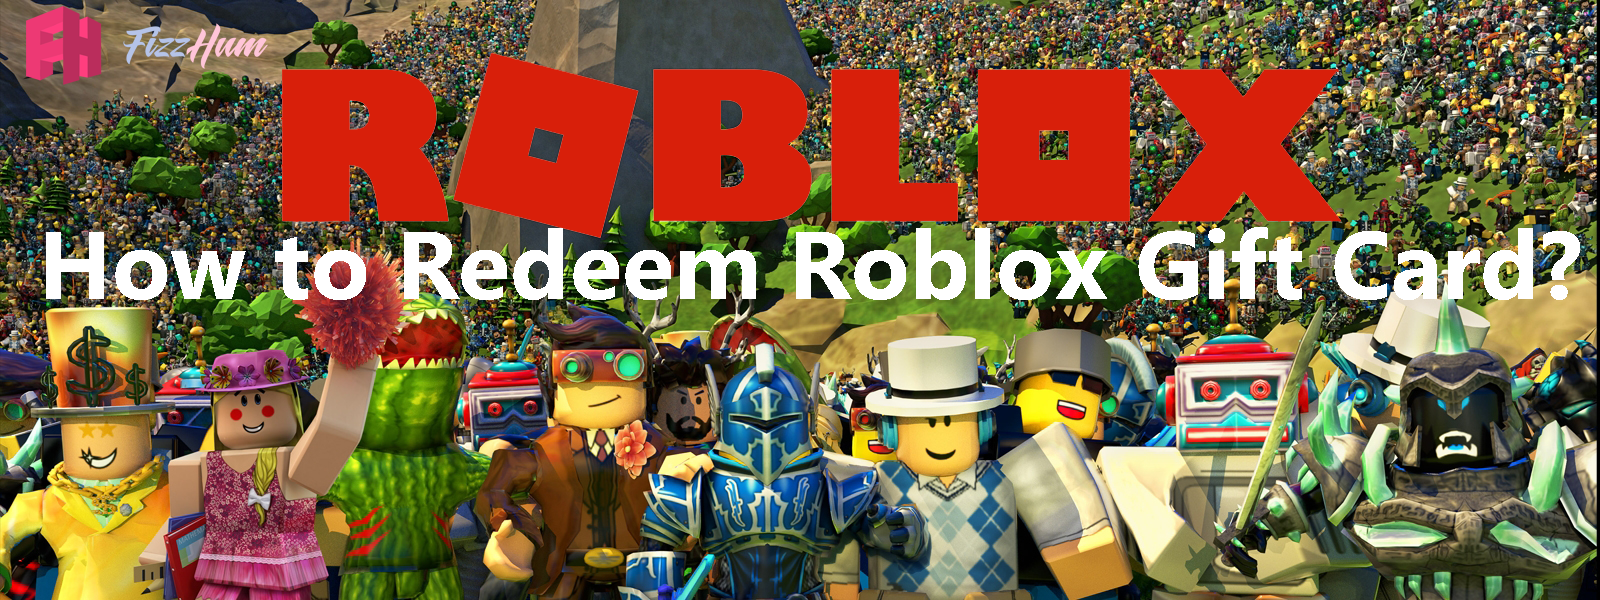 How To Redeem Roblox Gift Card Step By Step 2021 Fizzhum Com